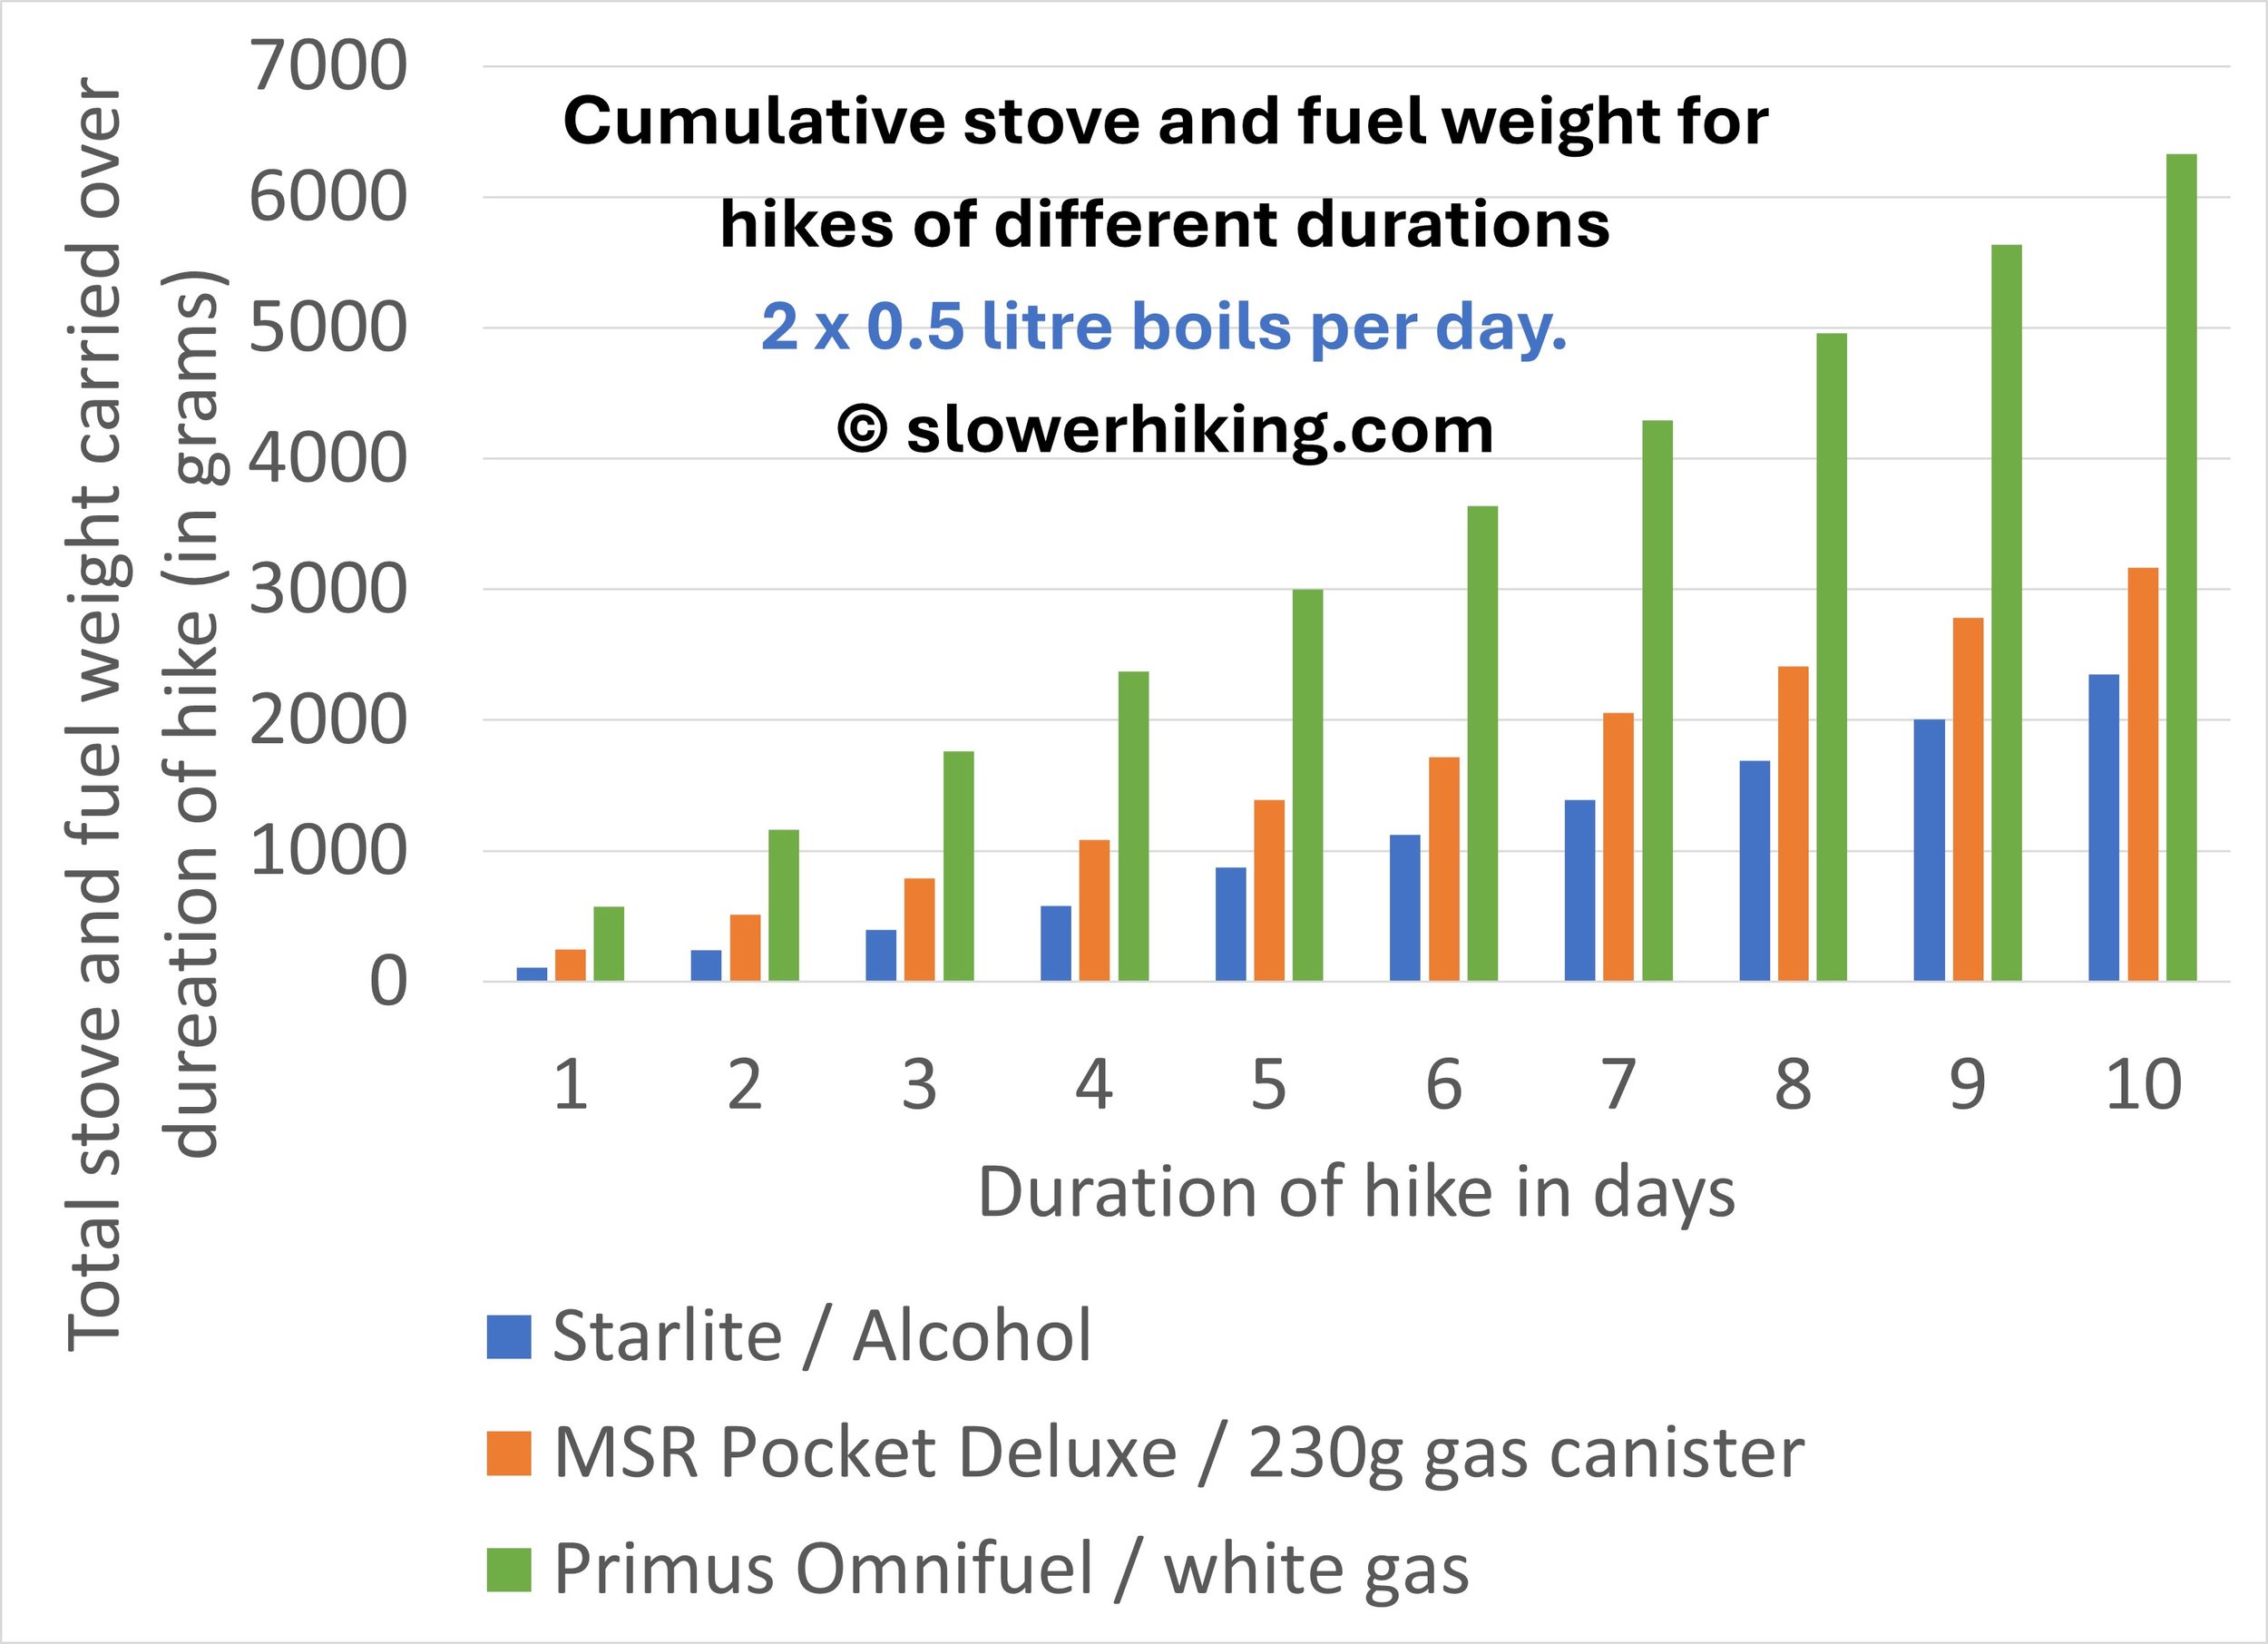 Total Hike Weights 2x0.5 Litre Fuels Comparison.jpg